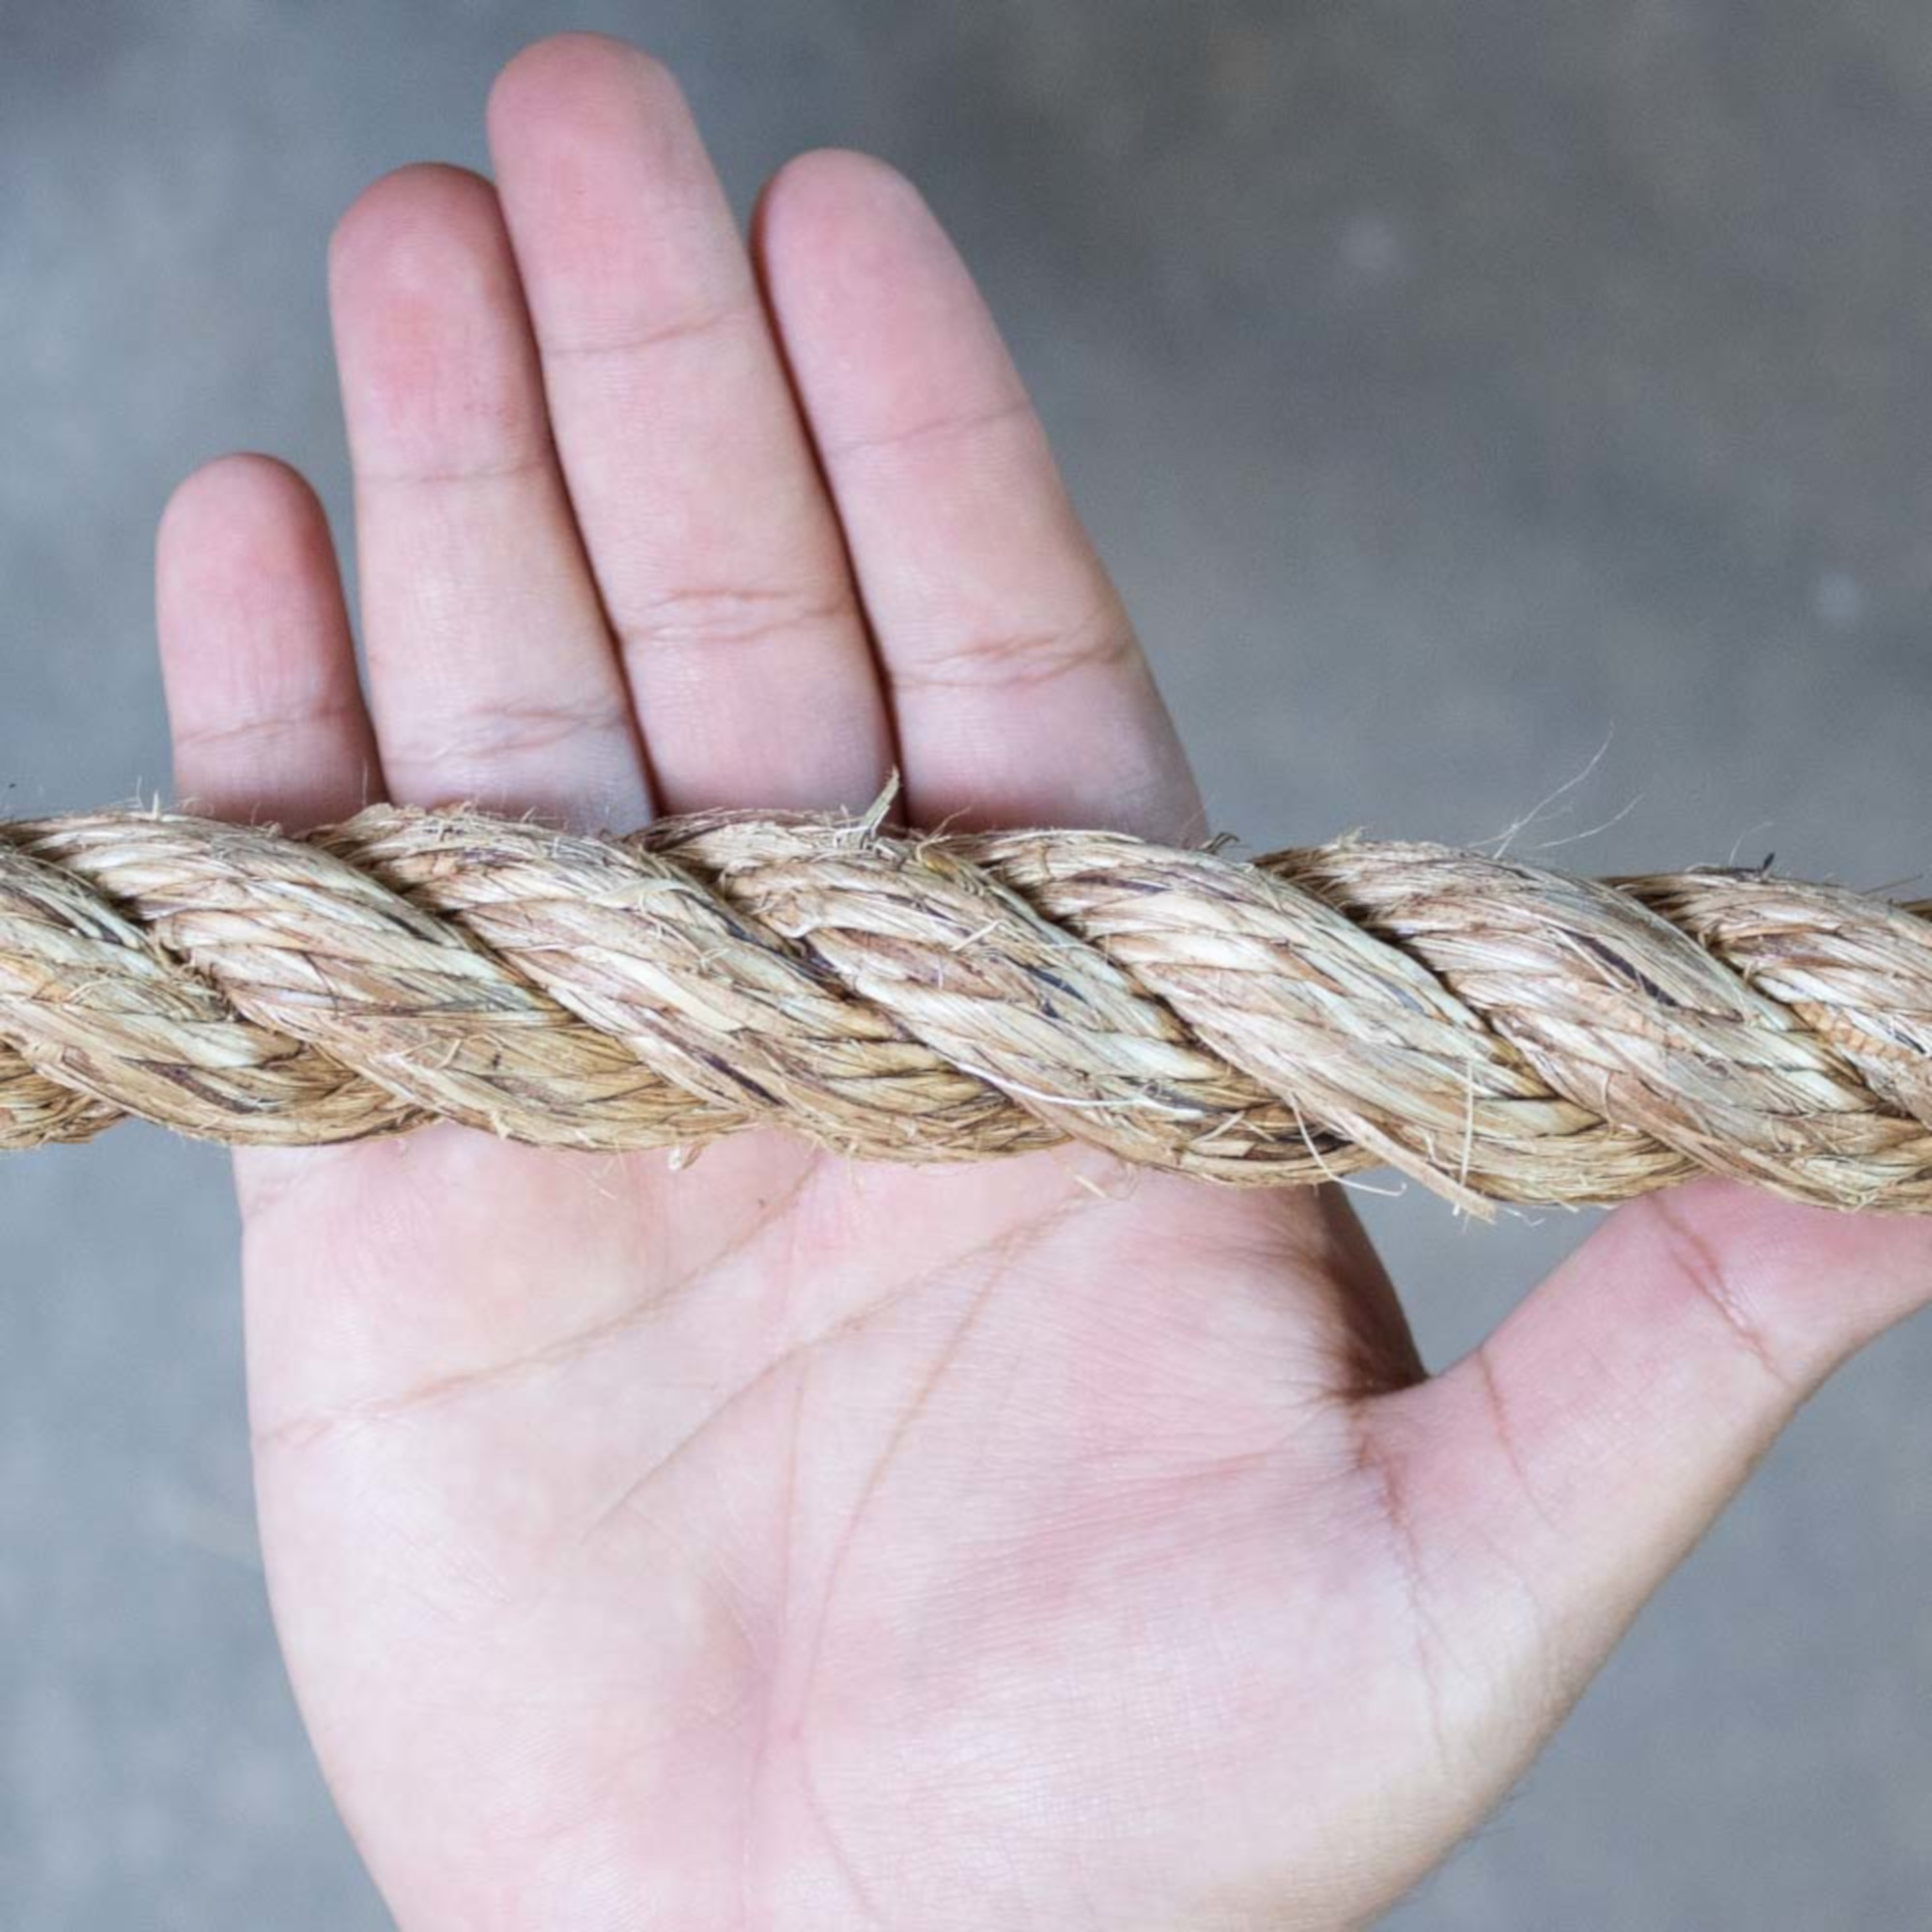 GOLBERG Manila Rope - Heavy Duty 3 Strand Natural Fiber - 1/4 inch, 5/16 inch, 3/8 inch, 1/2 inch, 5/8 inch, 3/4 inch, 1 inch, 2 inch - Available in Different Lengths - image 5 of 5